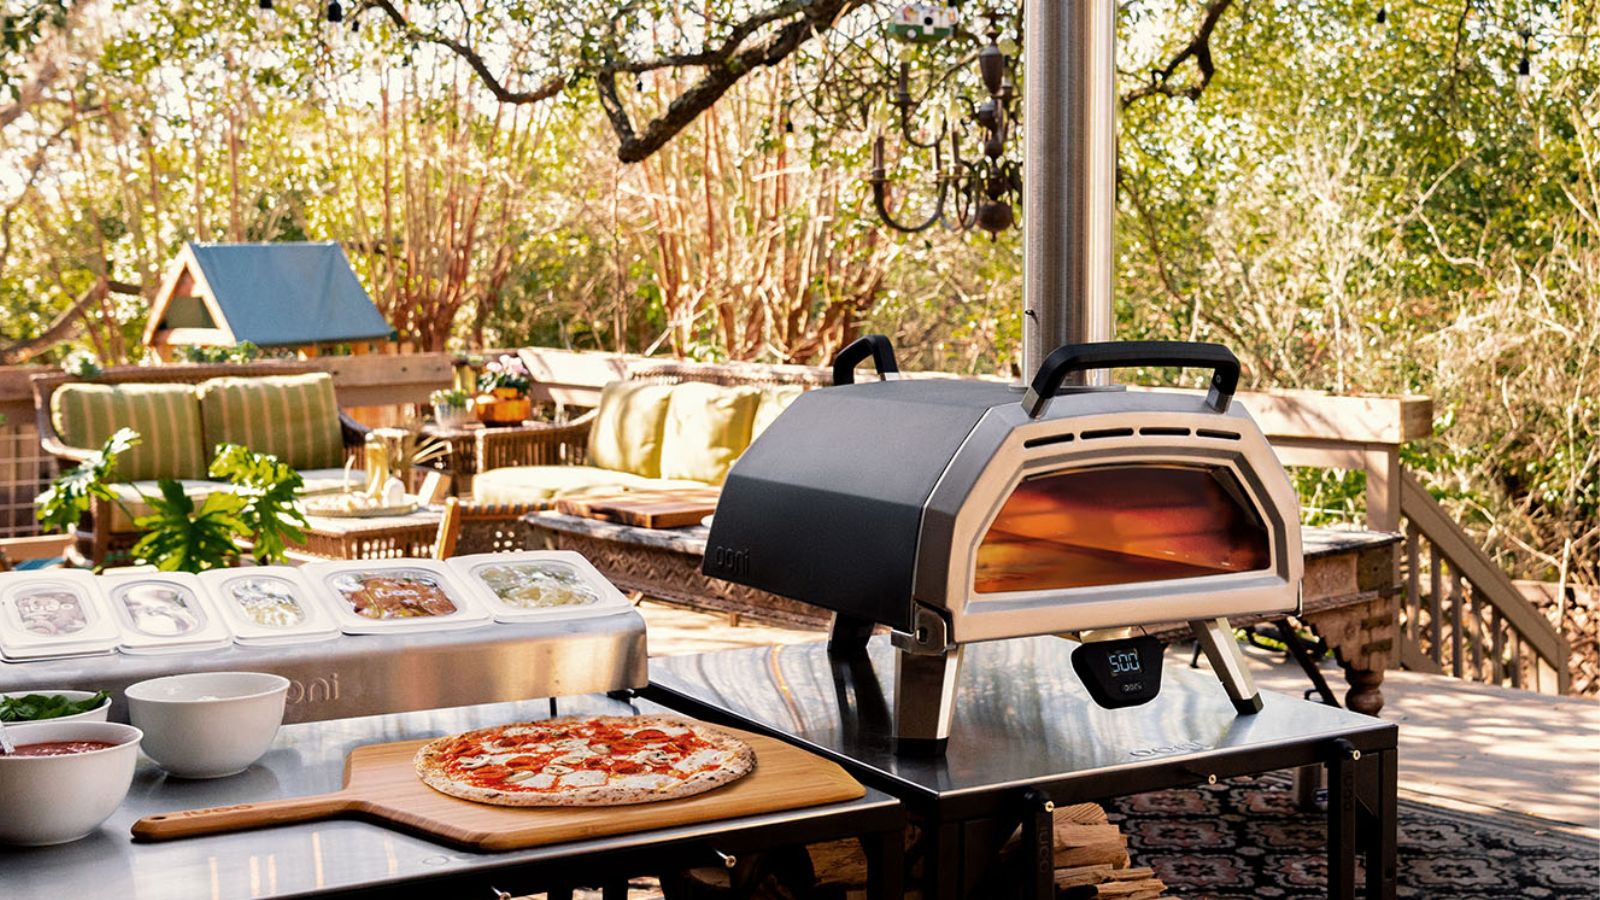 The Ninja Woodfire Outdoor Oven Cooks Pizza, Smokes Meat, and Much